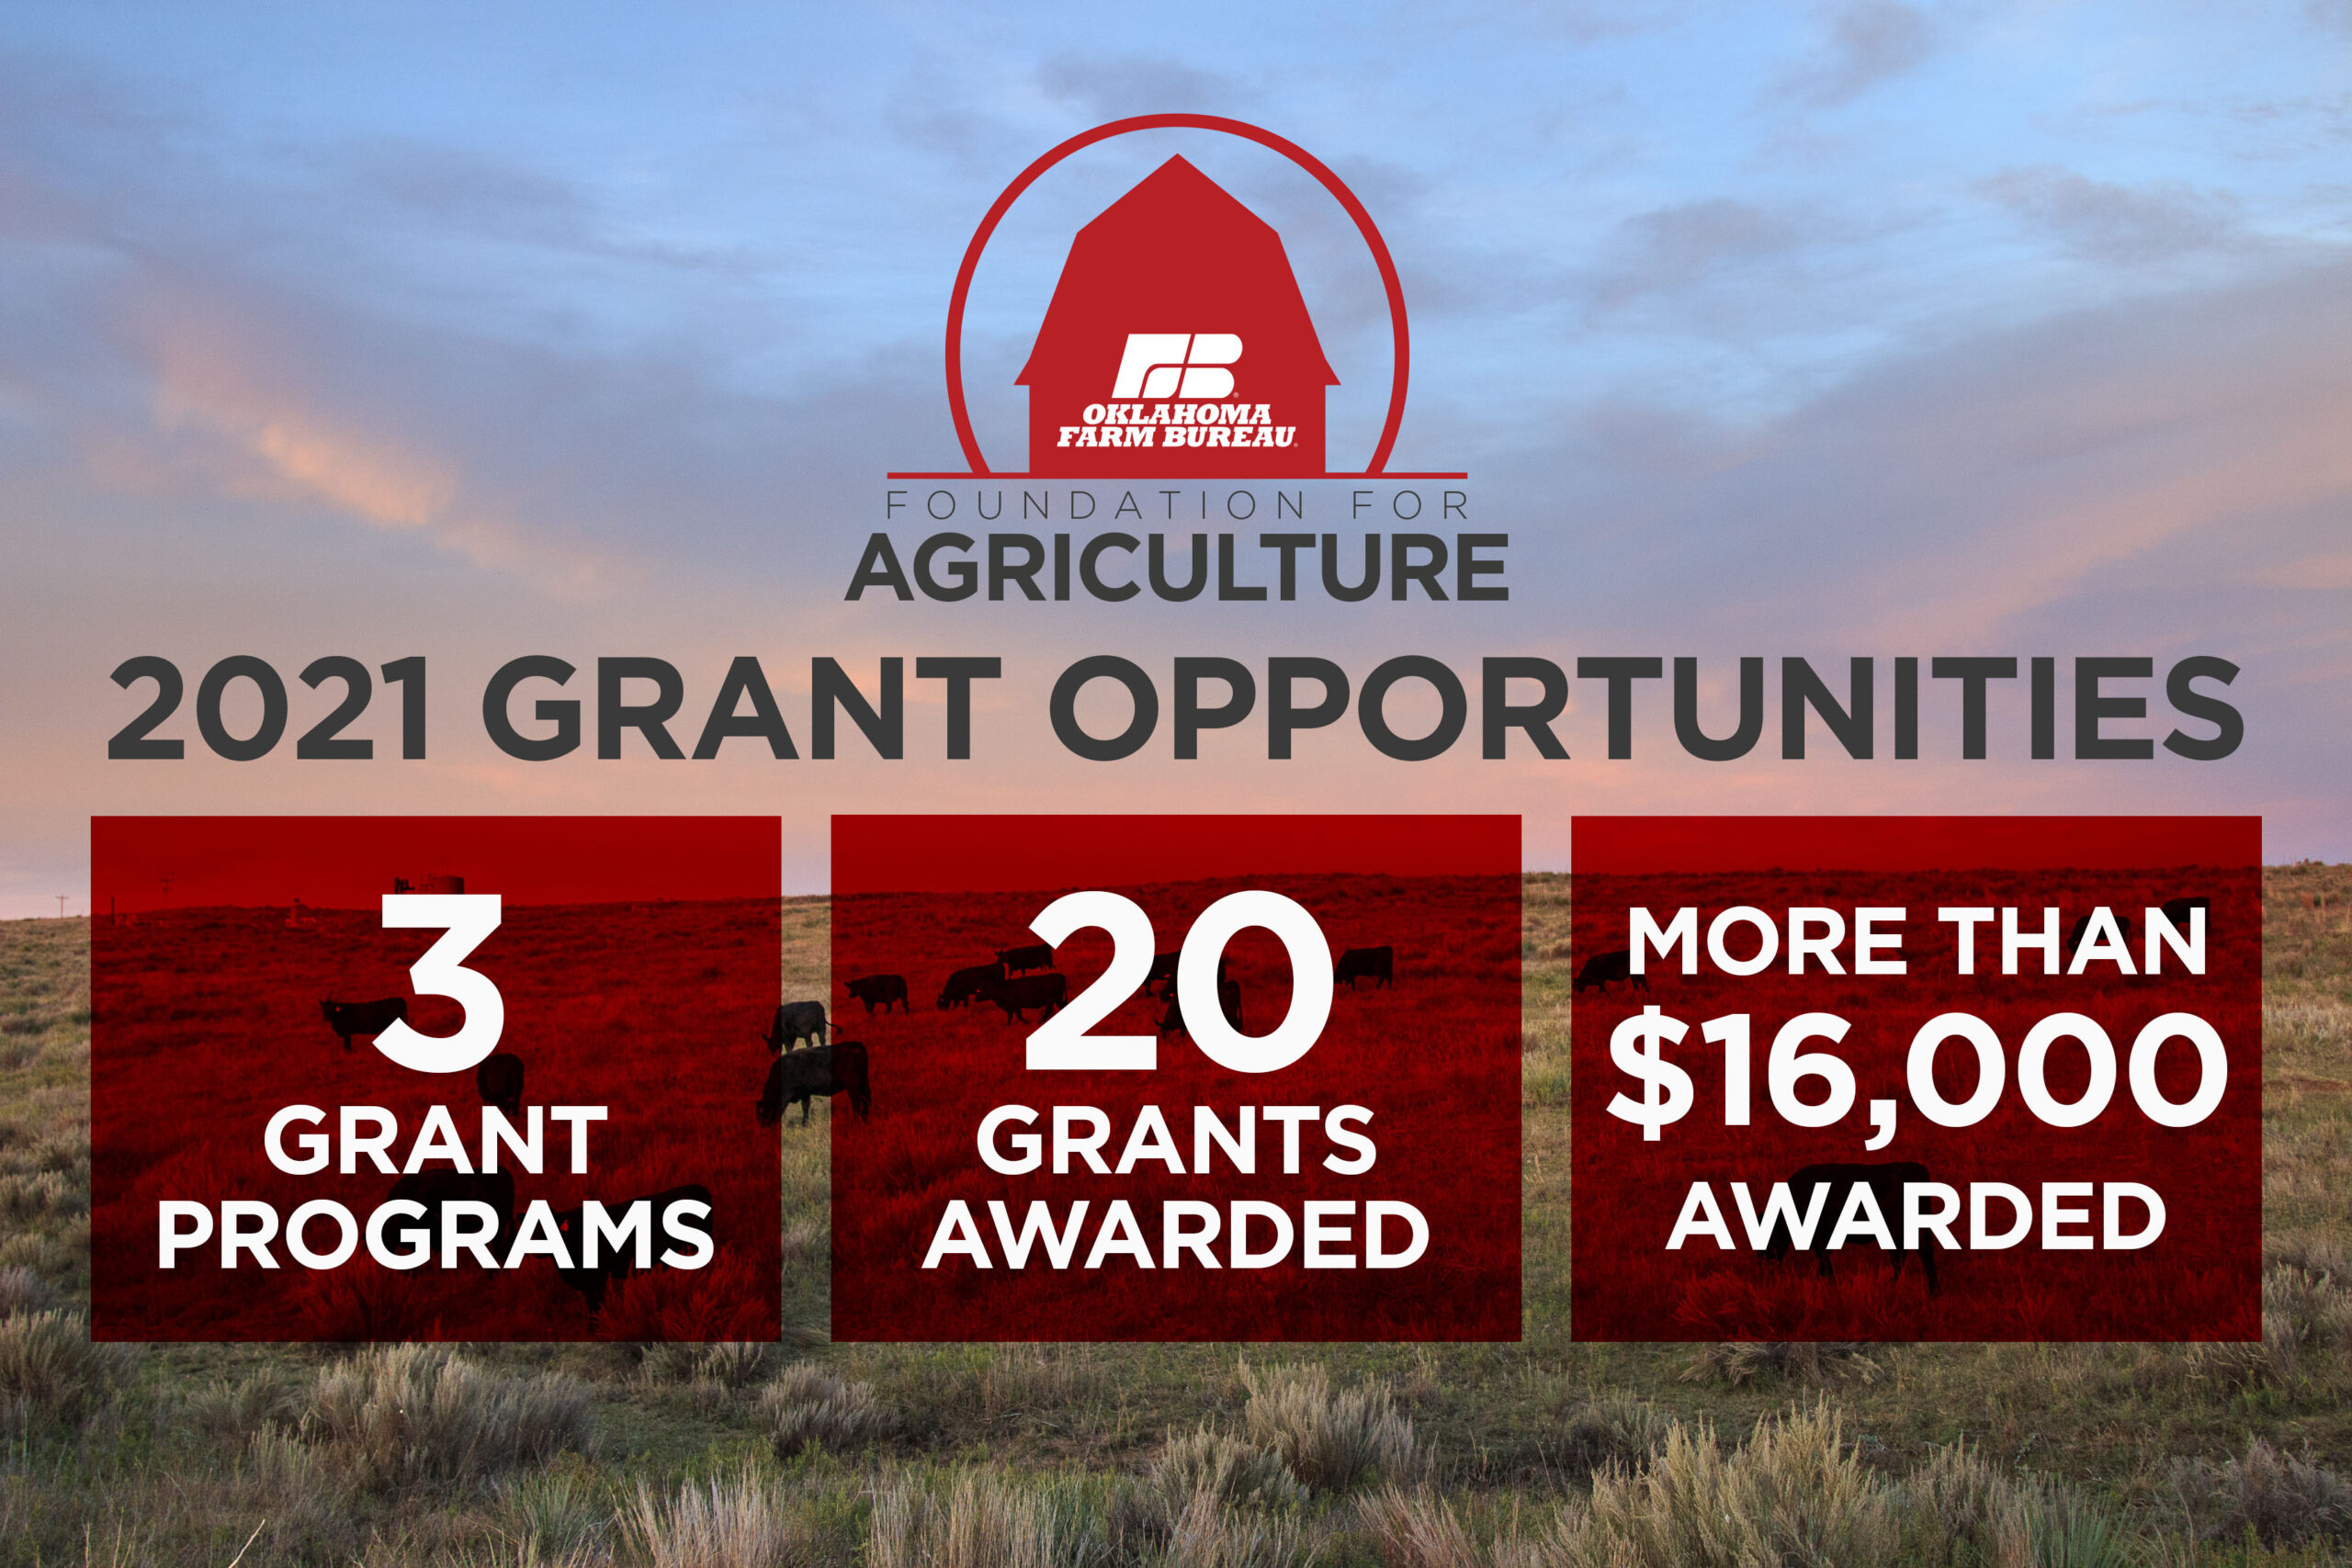 OKFB Foundation for Agriculture announces 16,000 in educational grants